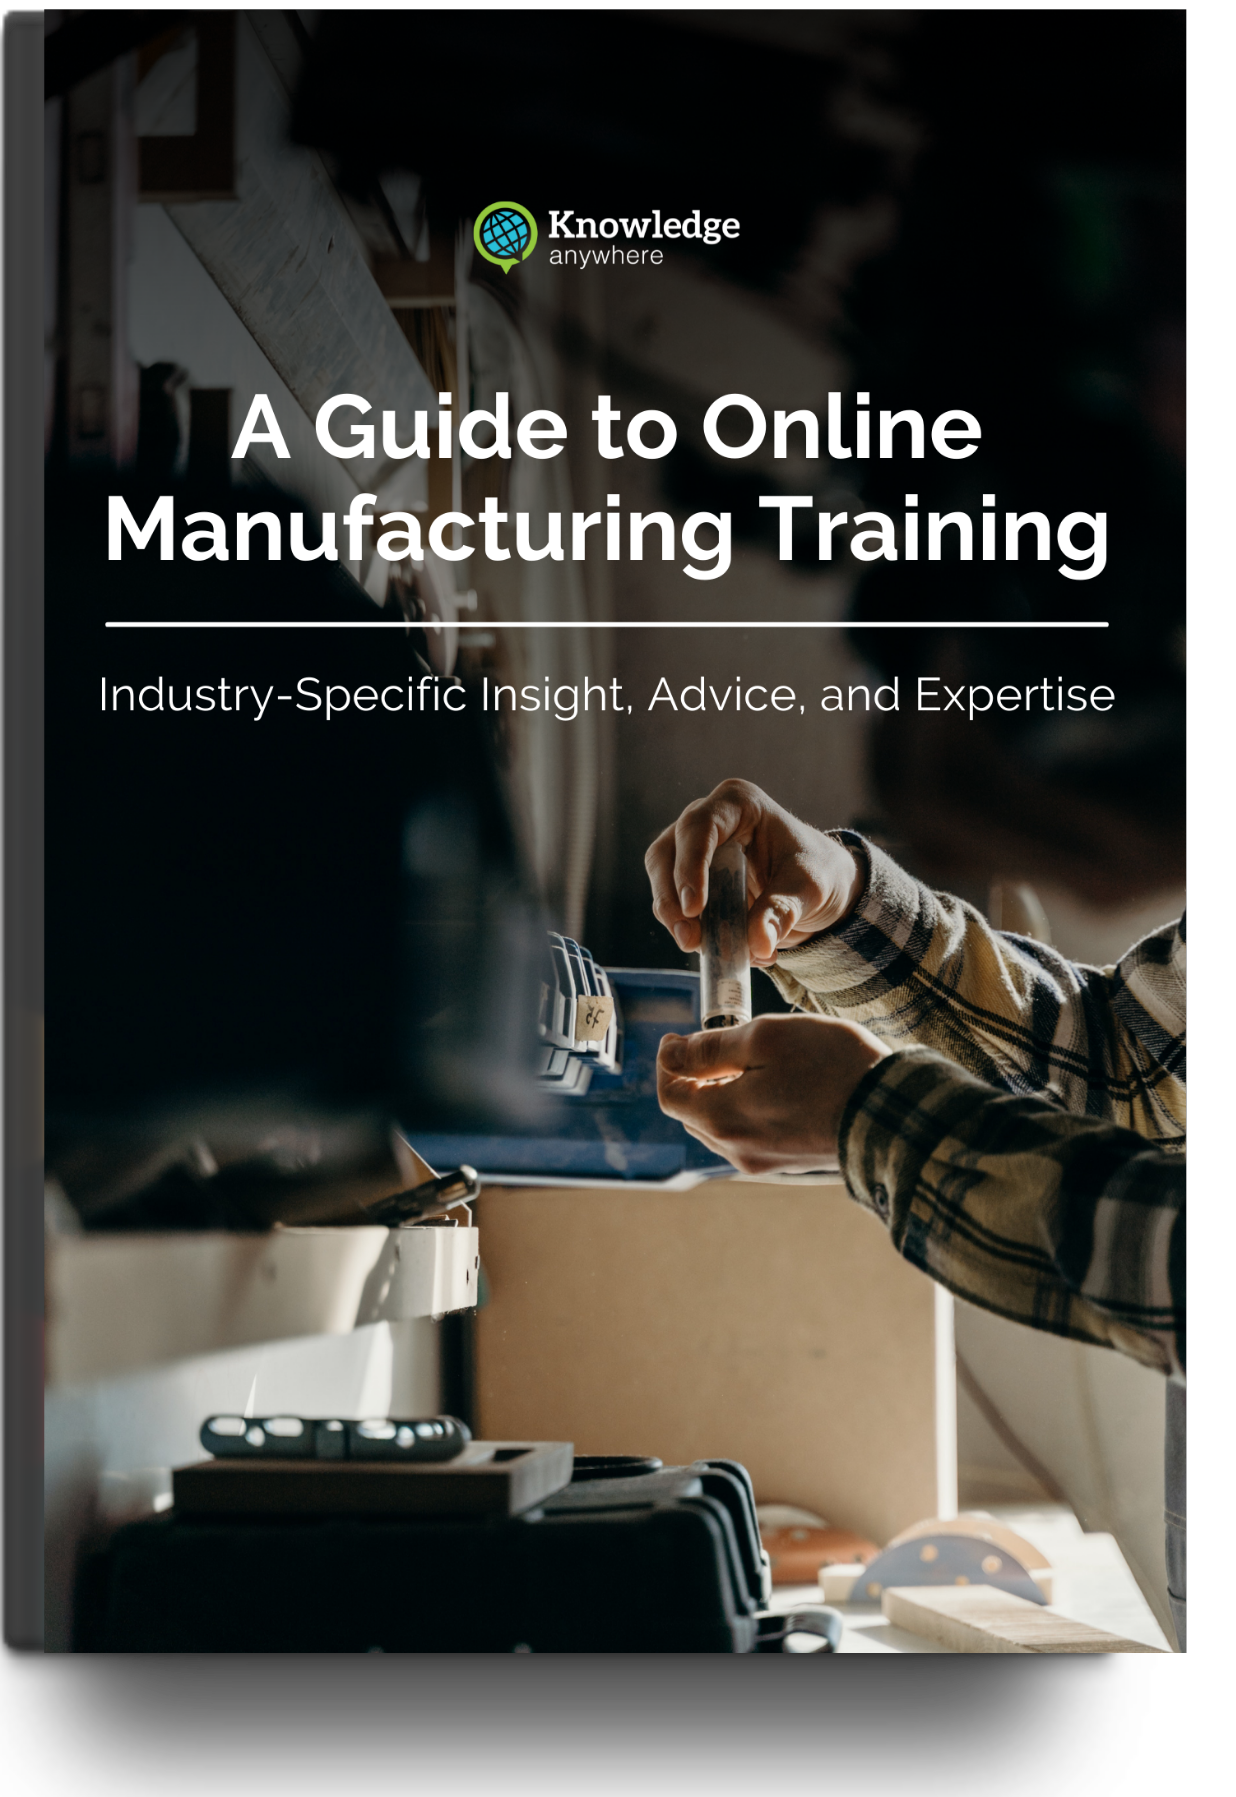 A Guide to Online Manufacturing Training